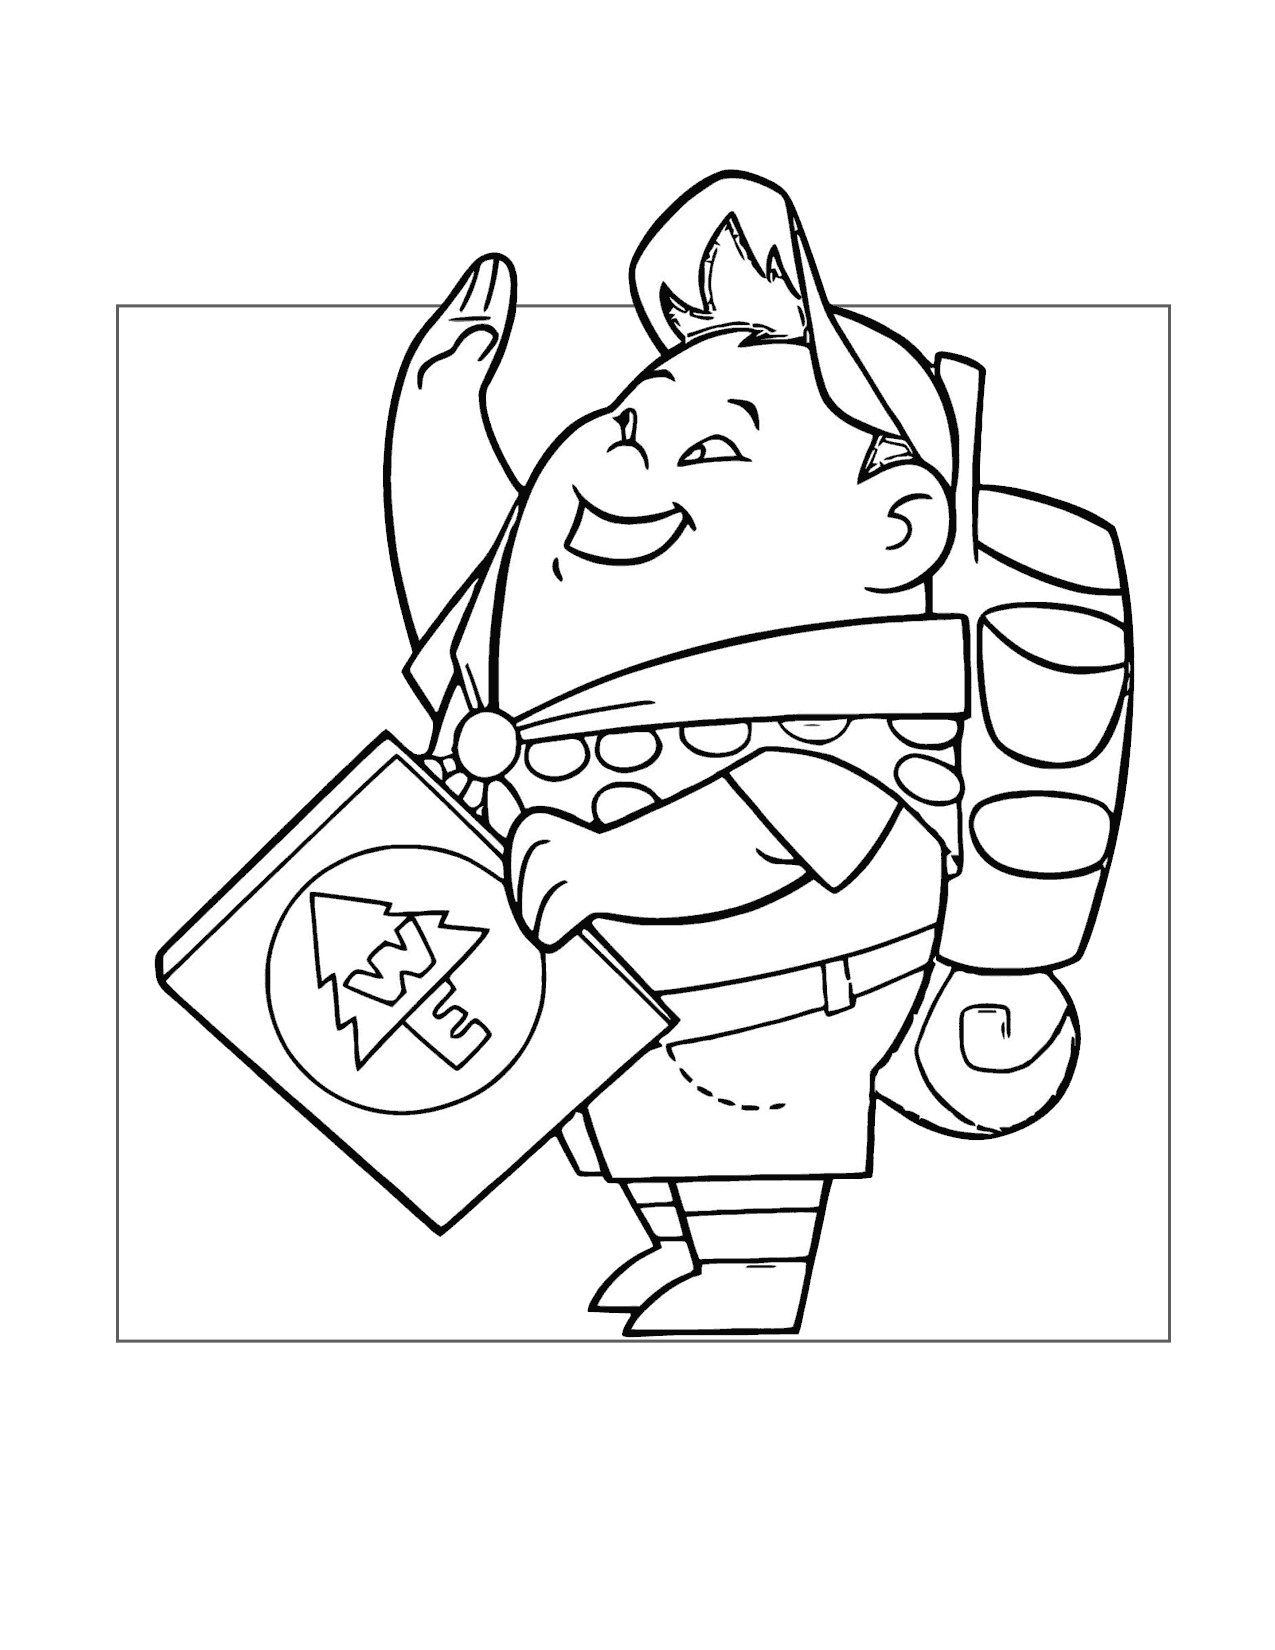 Russell Up Coloring Page